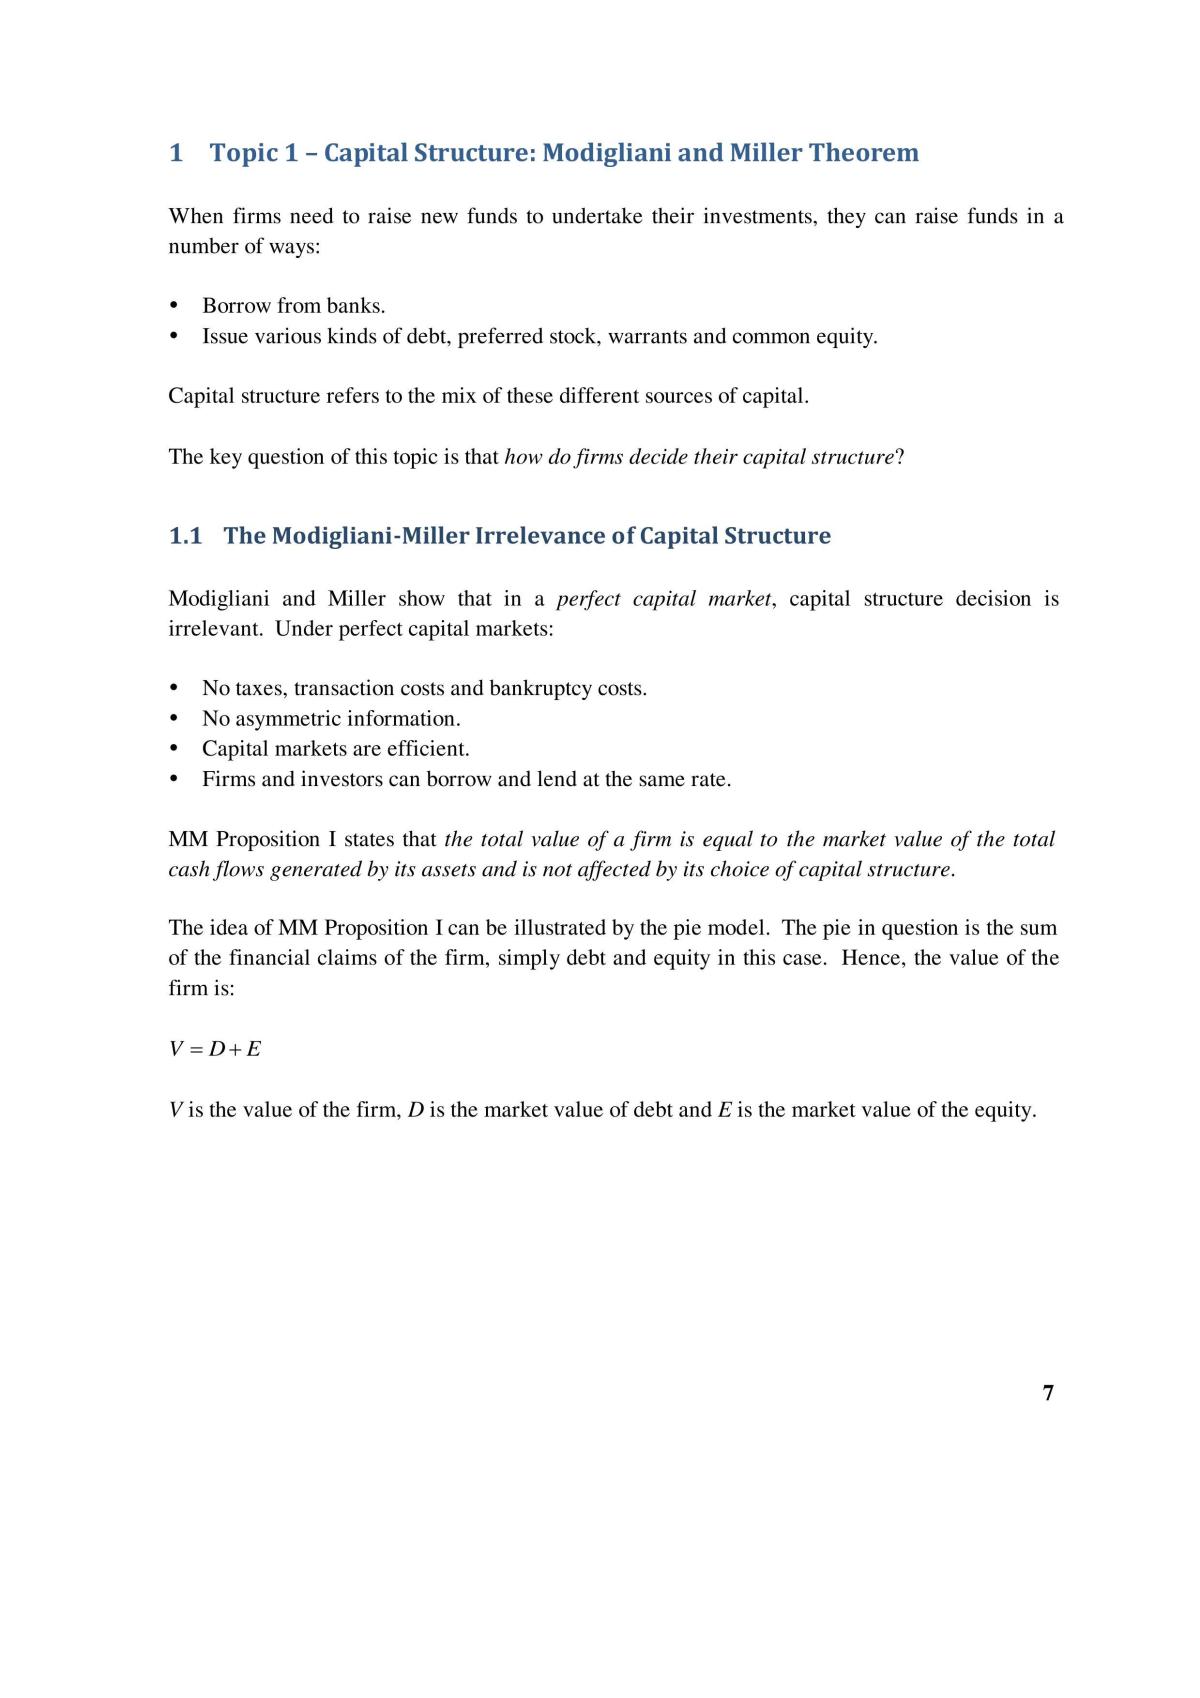 Corporate Finance: Theory and Practice Study Notes - Page 8